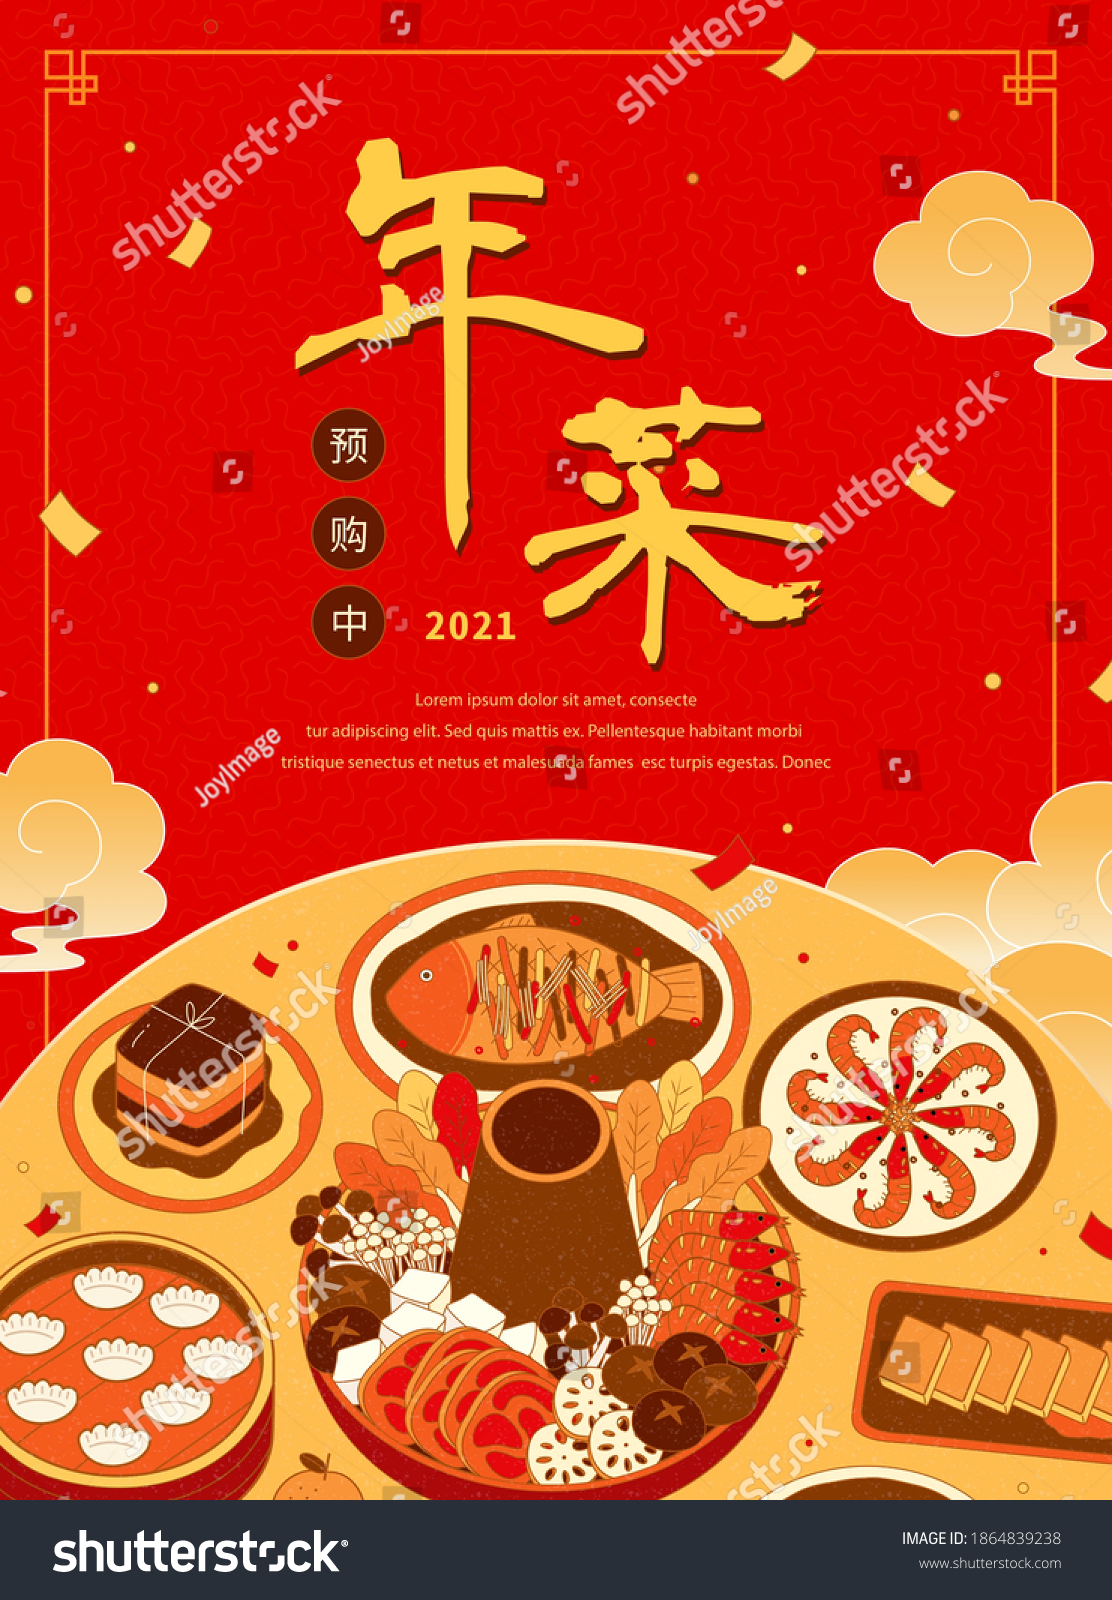 SVG of Delicious reunion dinner poster for lunar year, Chinese text translation: pre-order for new year's food svg